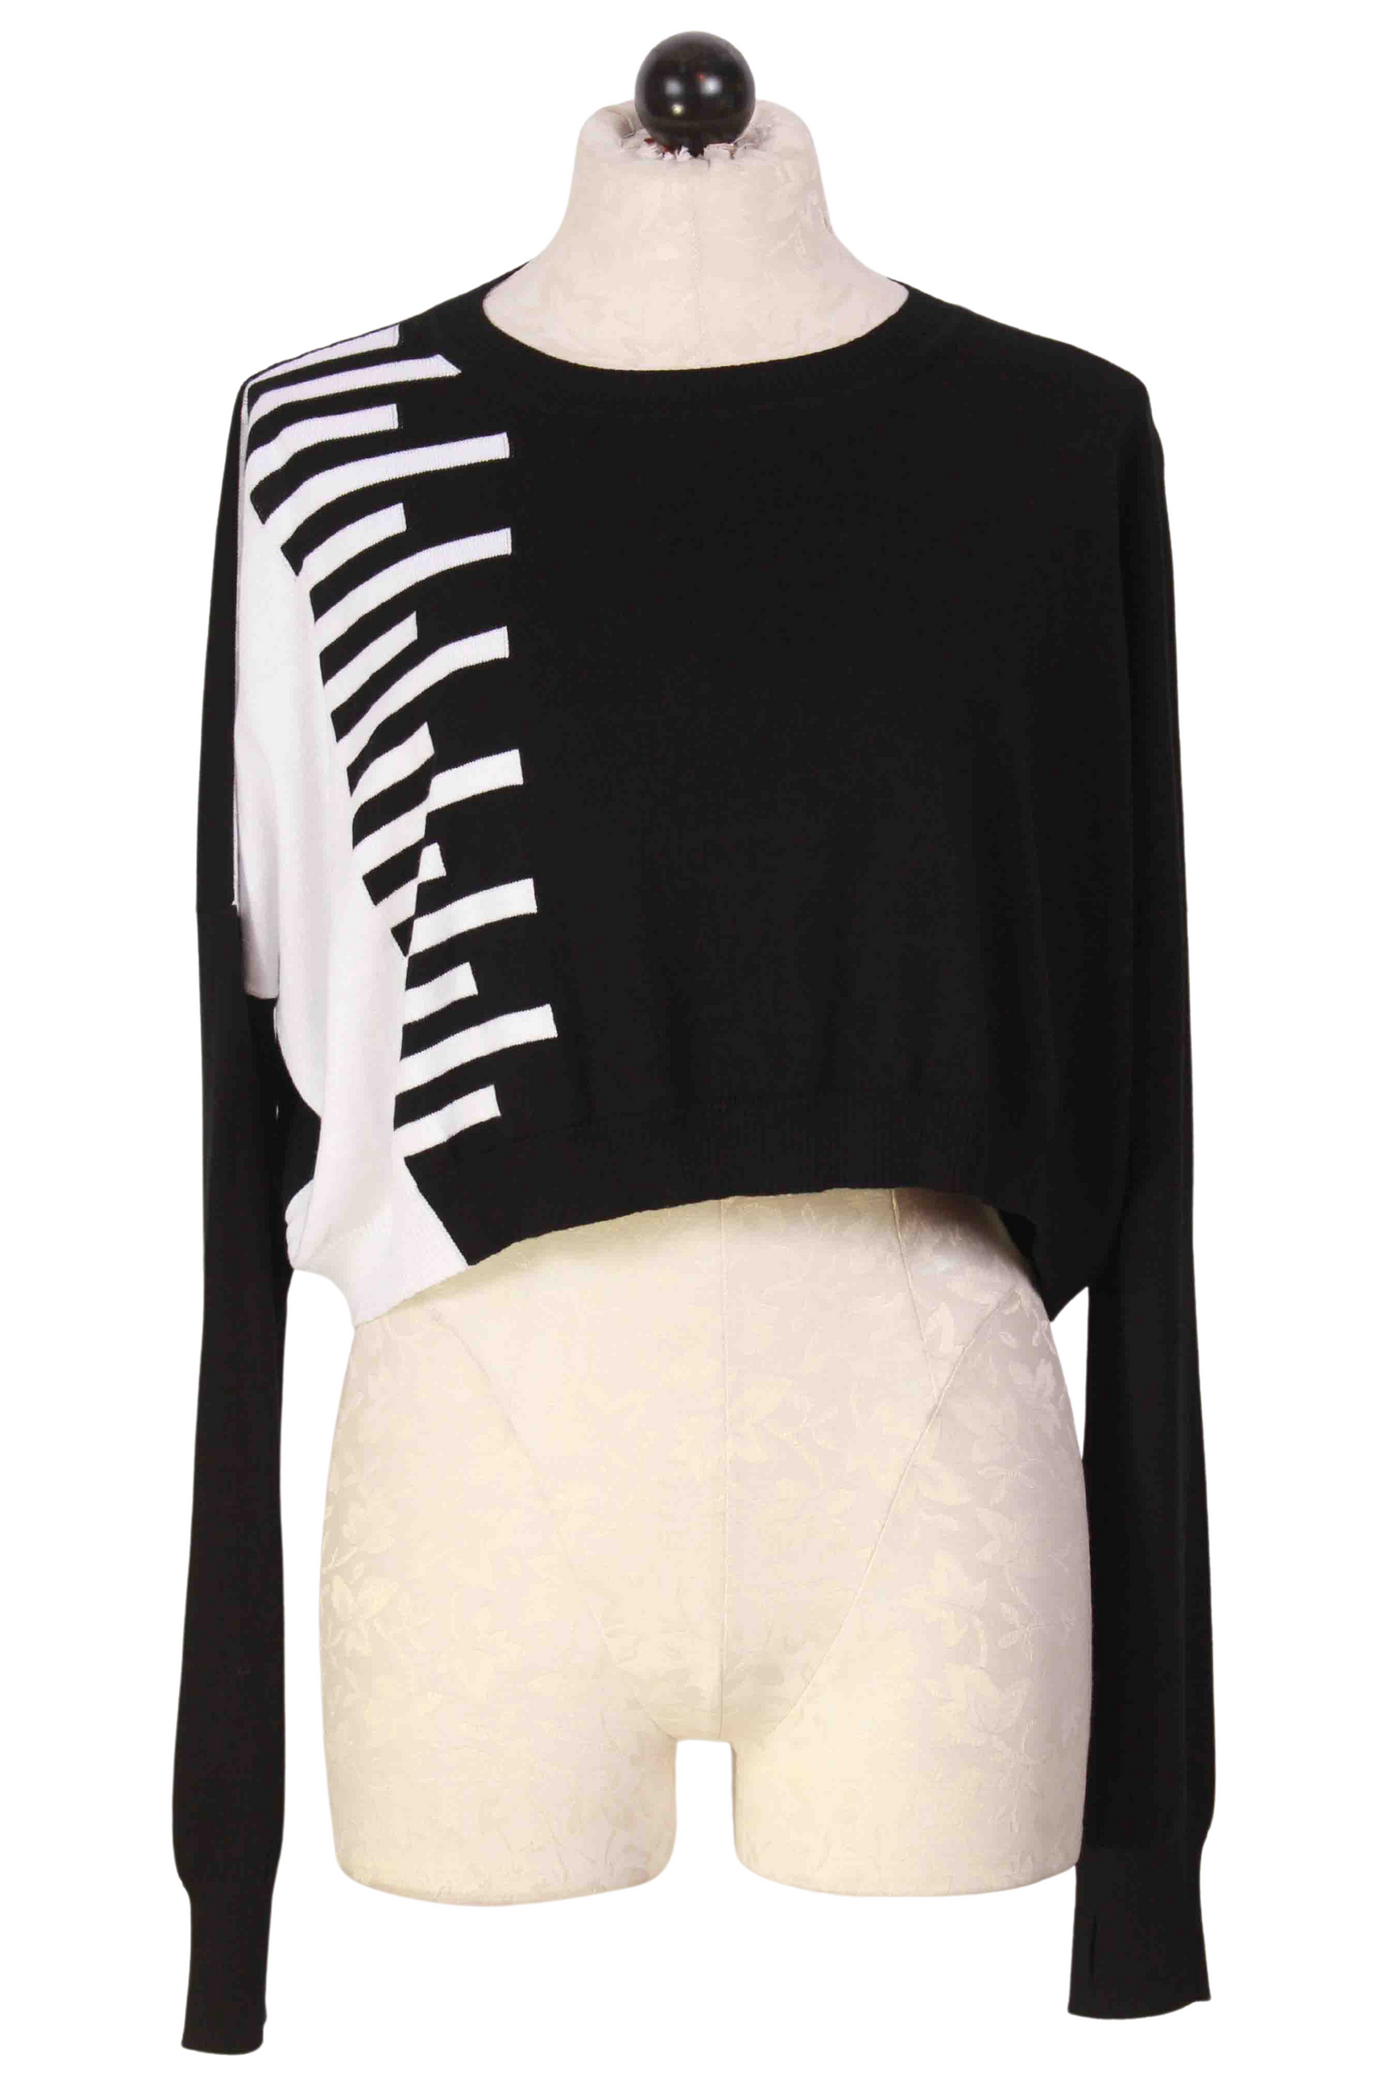 black and white Cropped Keyboard Sweater by Planet